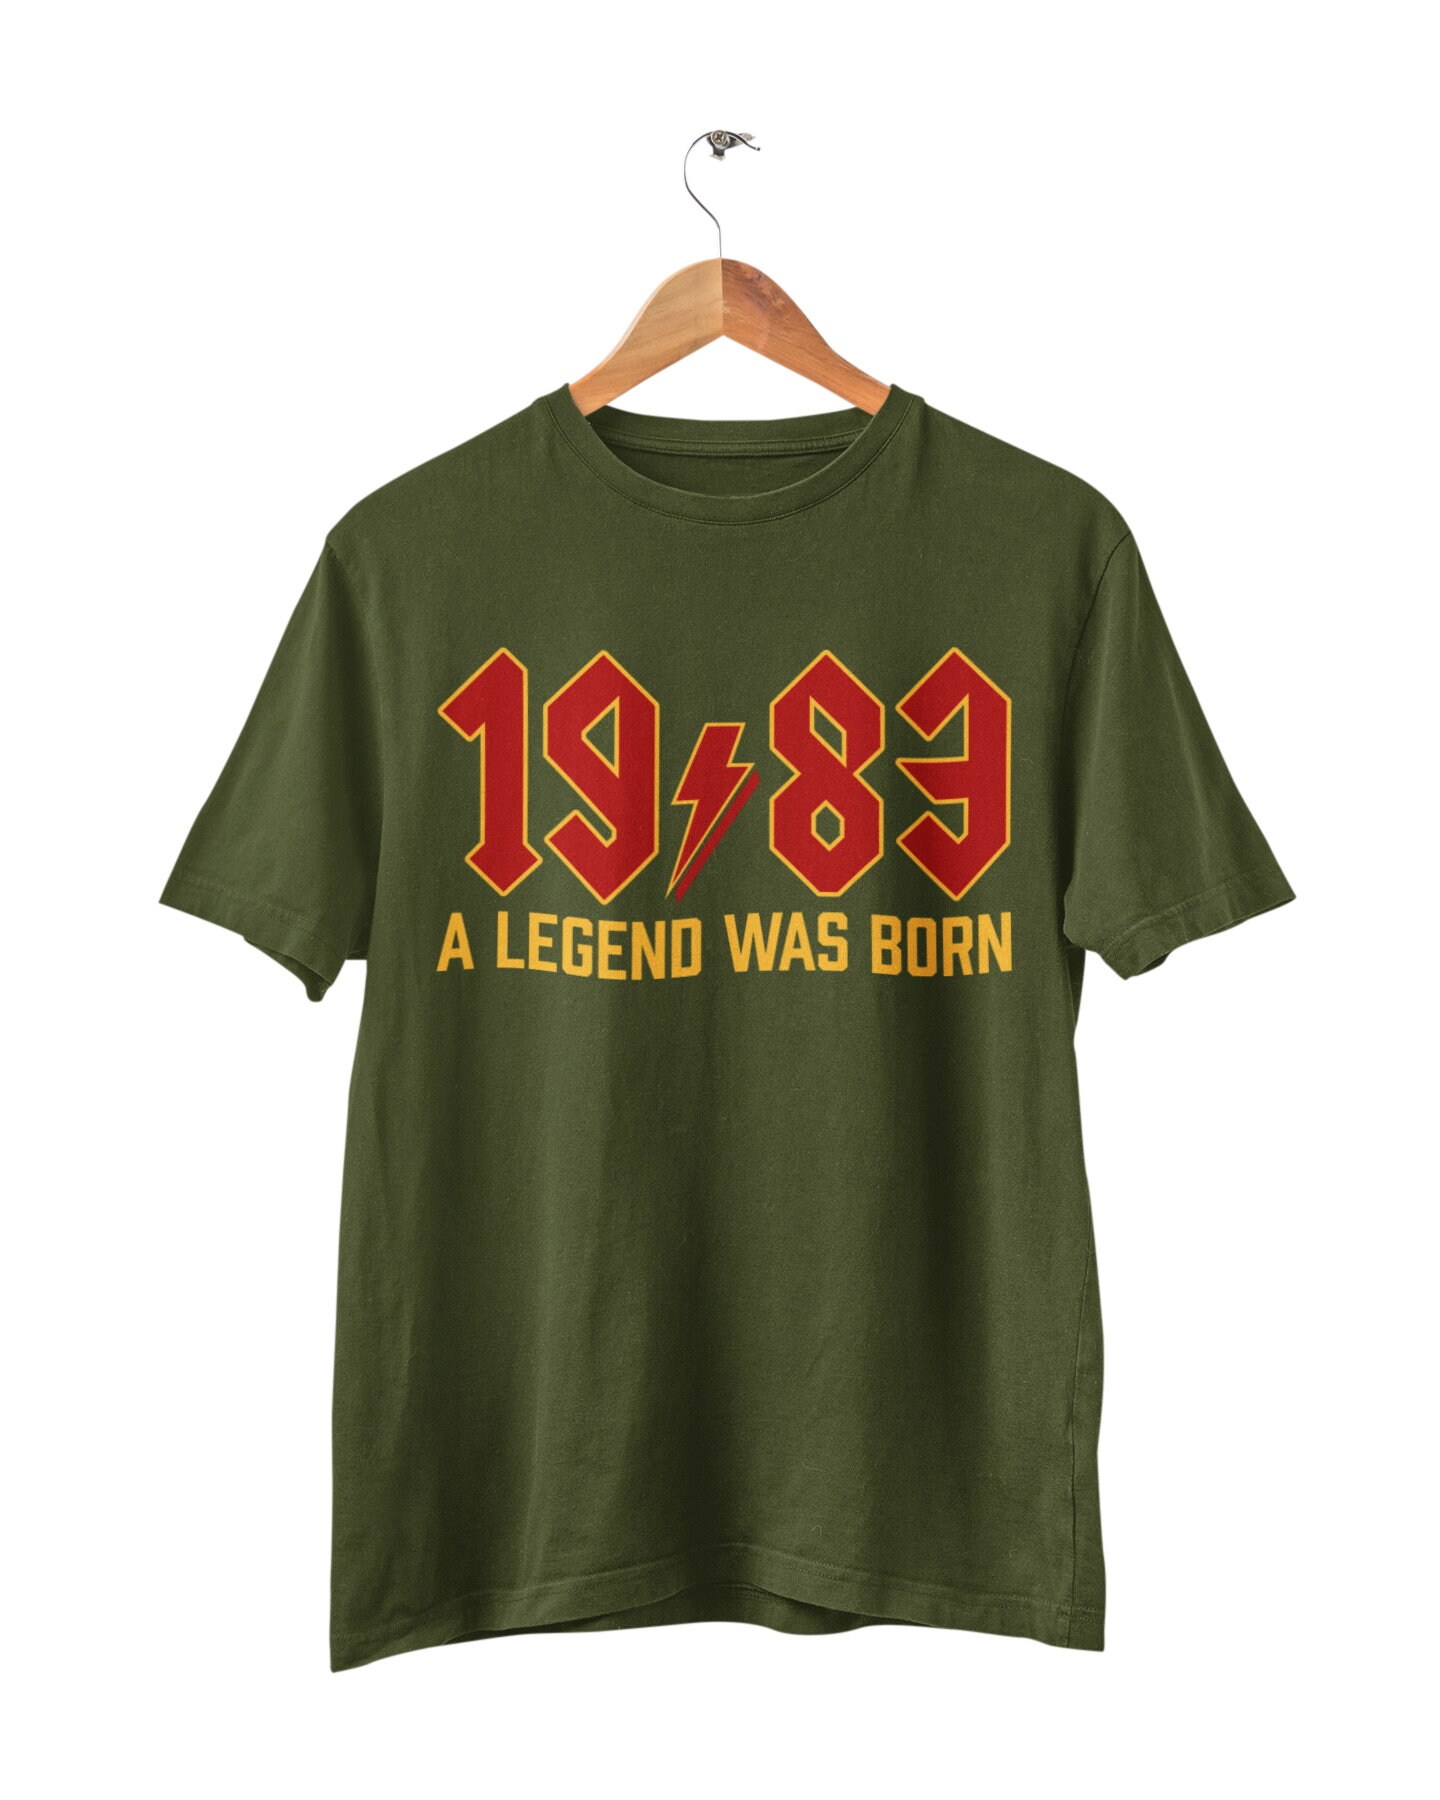 Discover Funny 40th Birthday T Shirt 2023 1983 A Legend Was Born T-Shirt